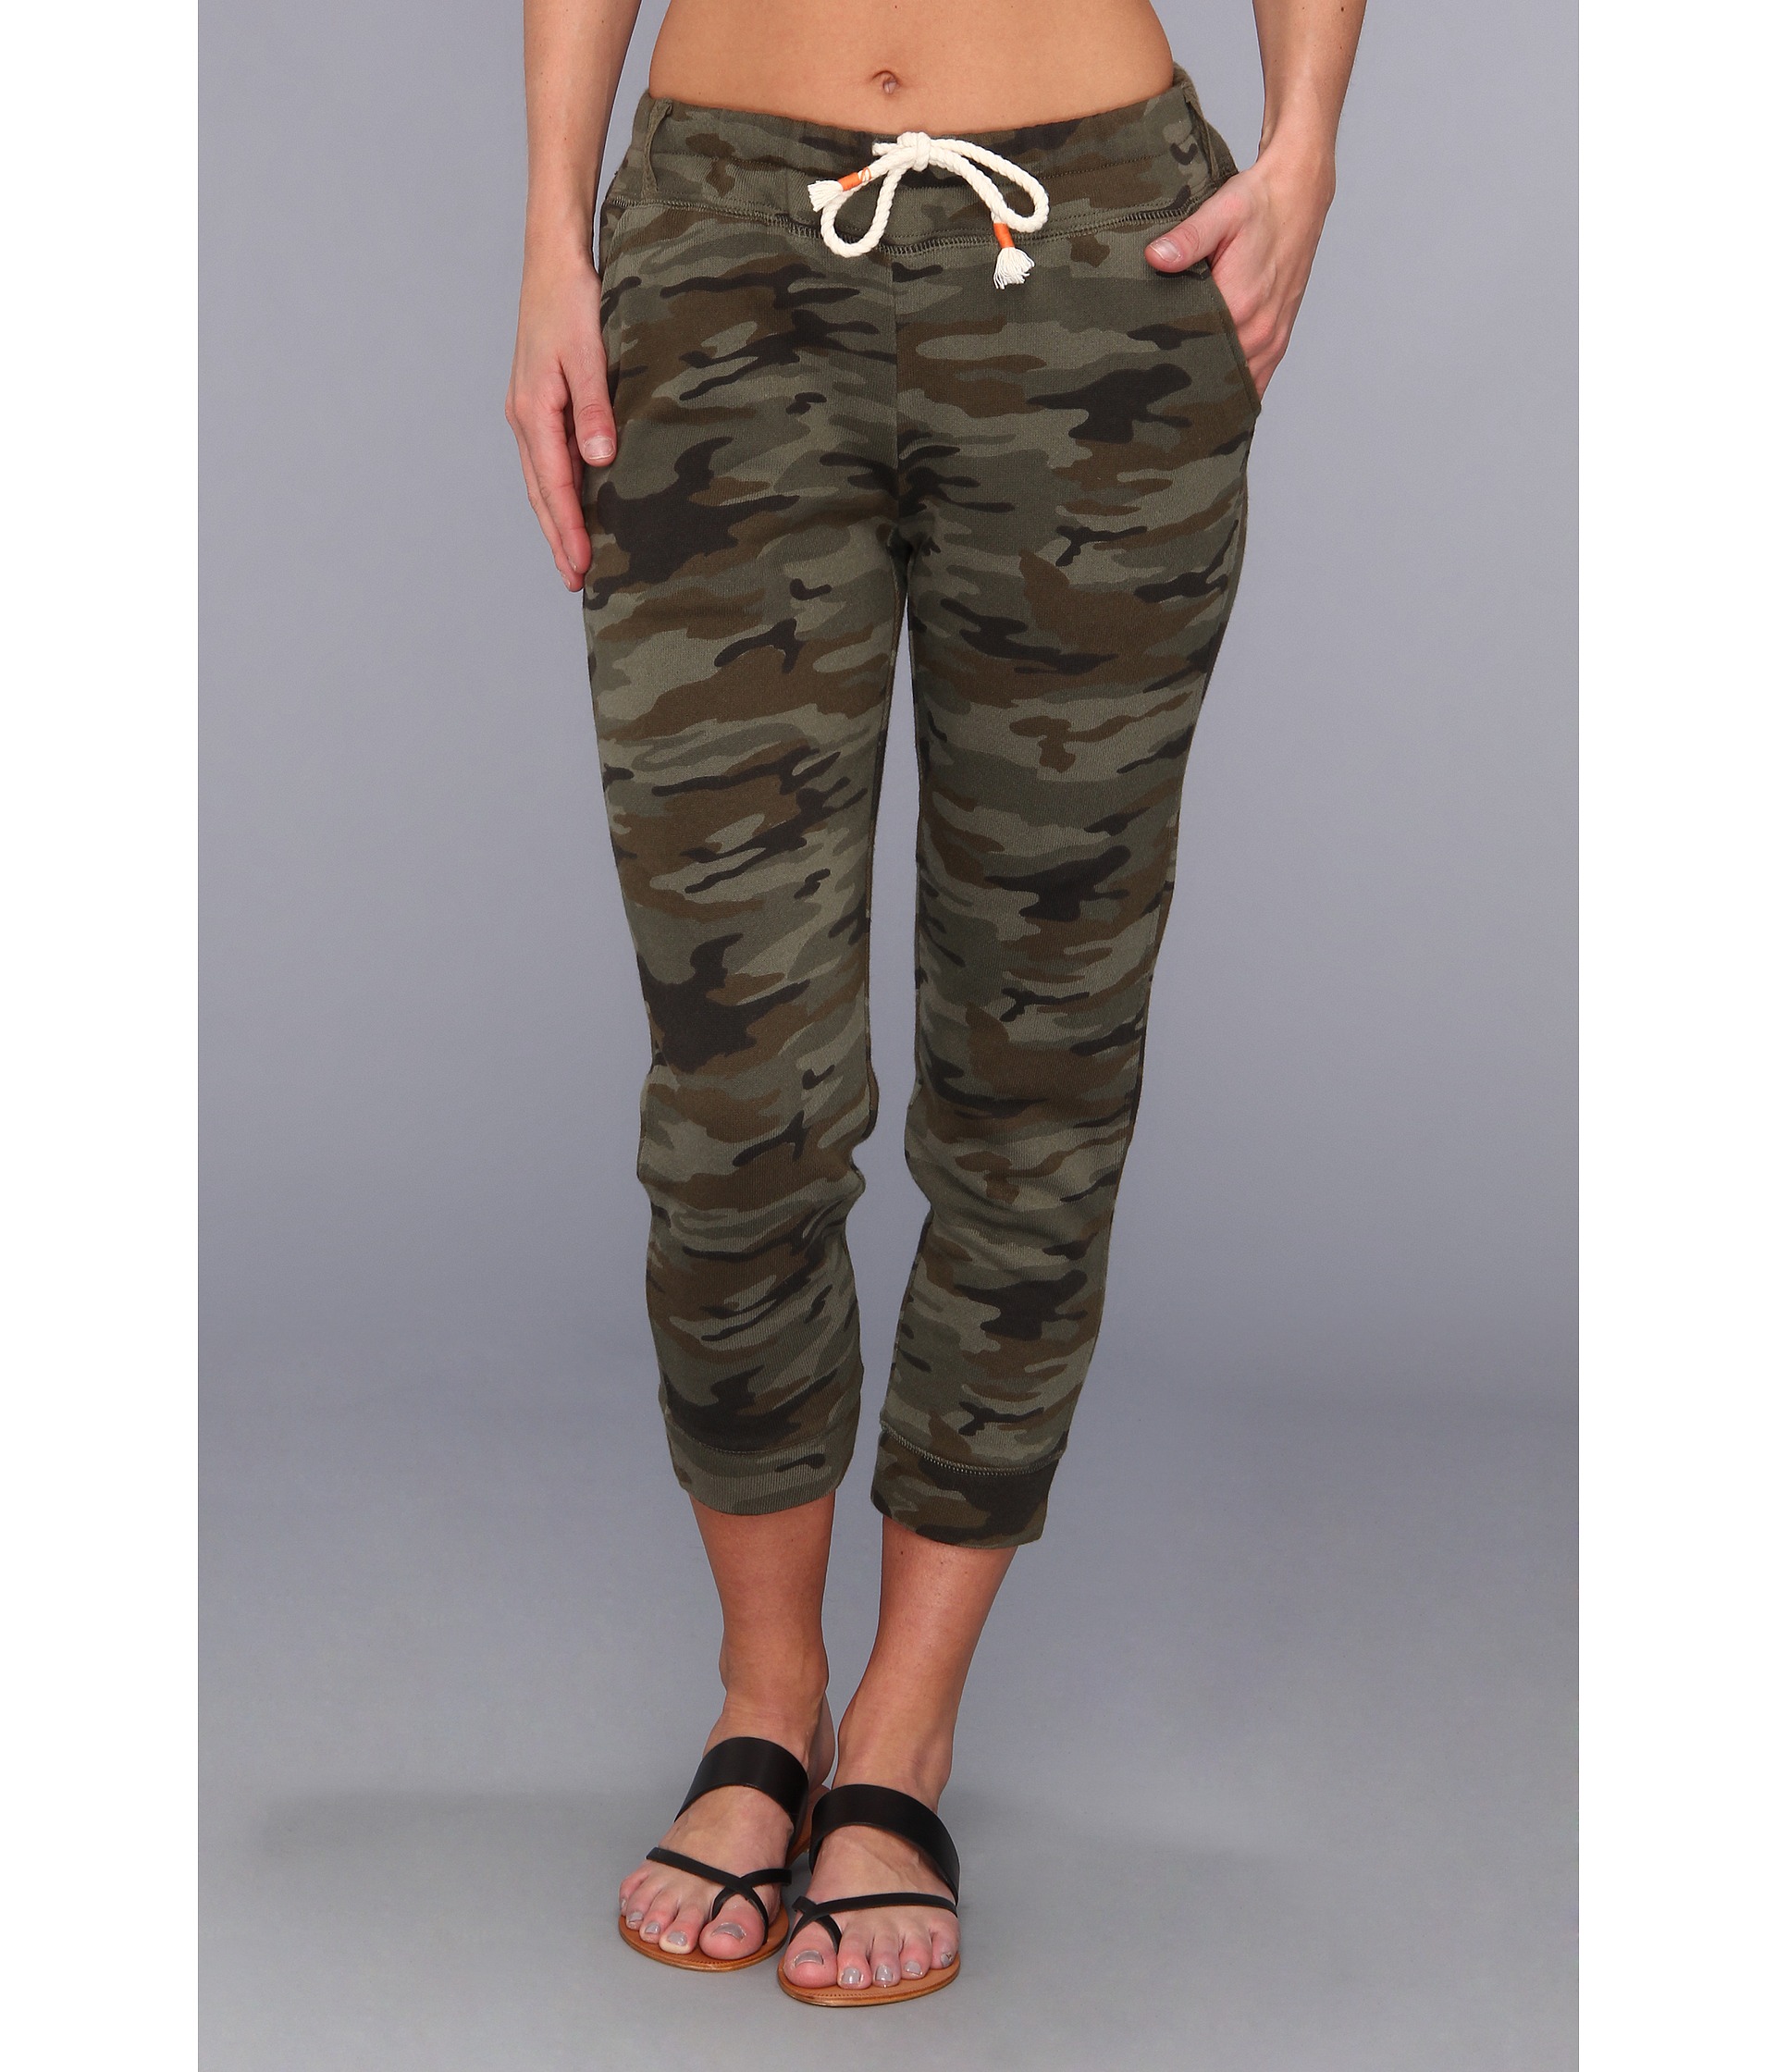 Lucky Brand Camo Cropped Skinny Pant Green Multi